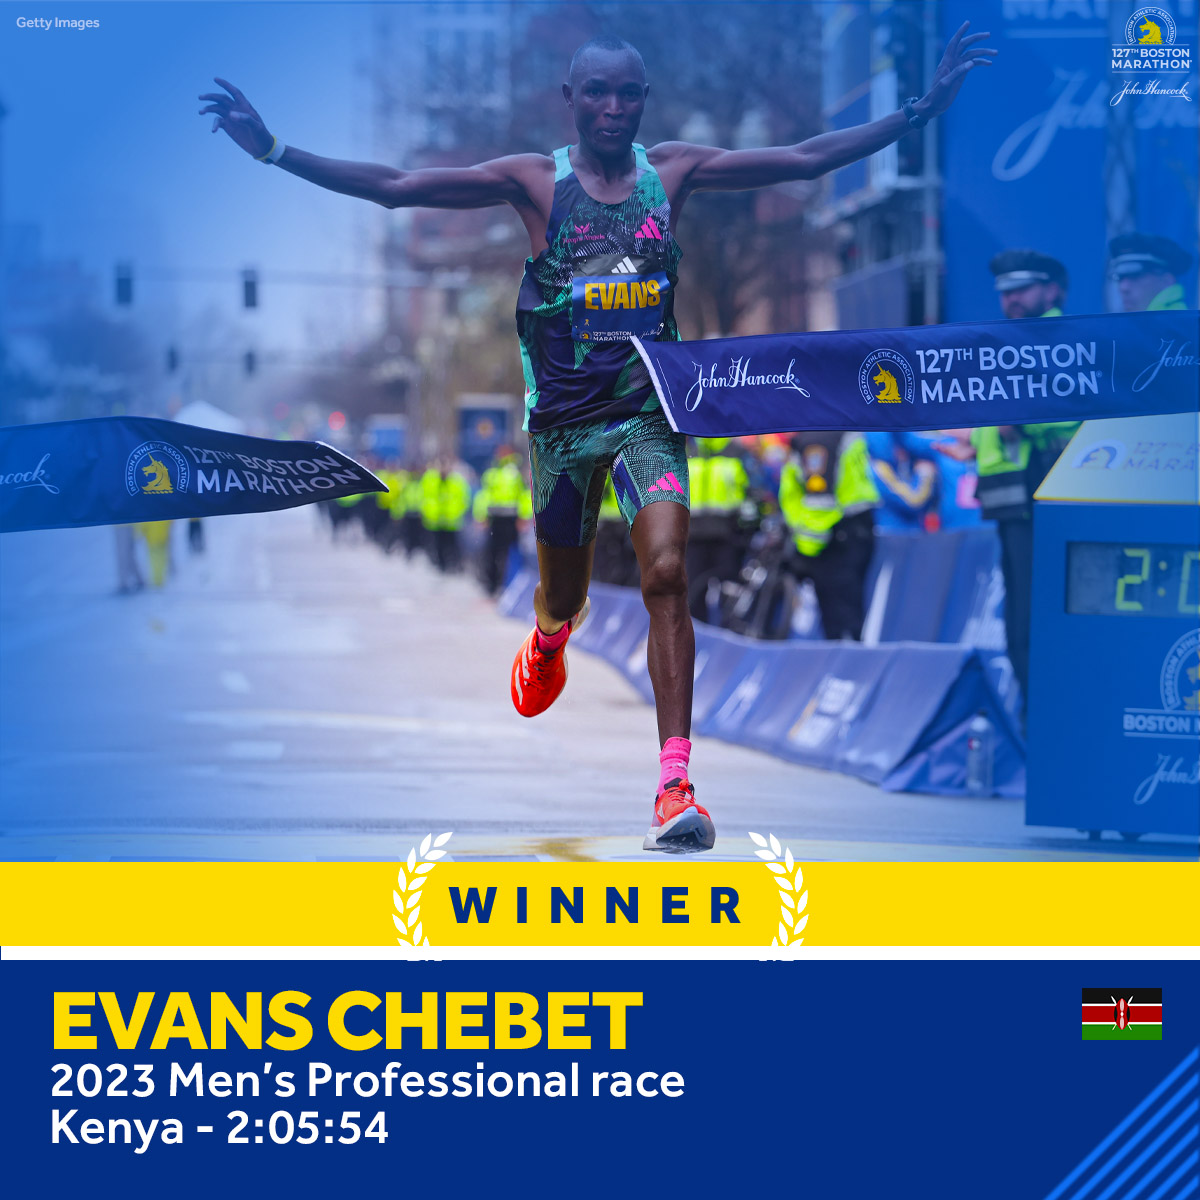 Back to back! 🥇 Congratulations to Evans Chebet of Kenya, the men's winner of the 127th running of the Boston Marathon -- his second win in a row. #Boston127